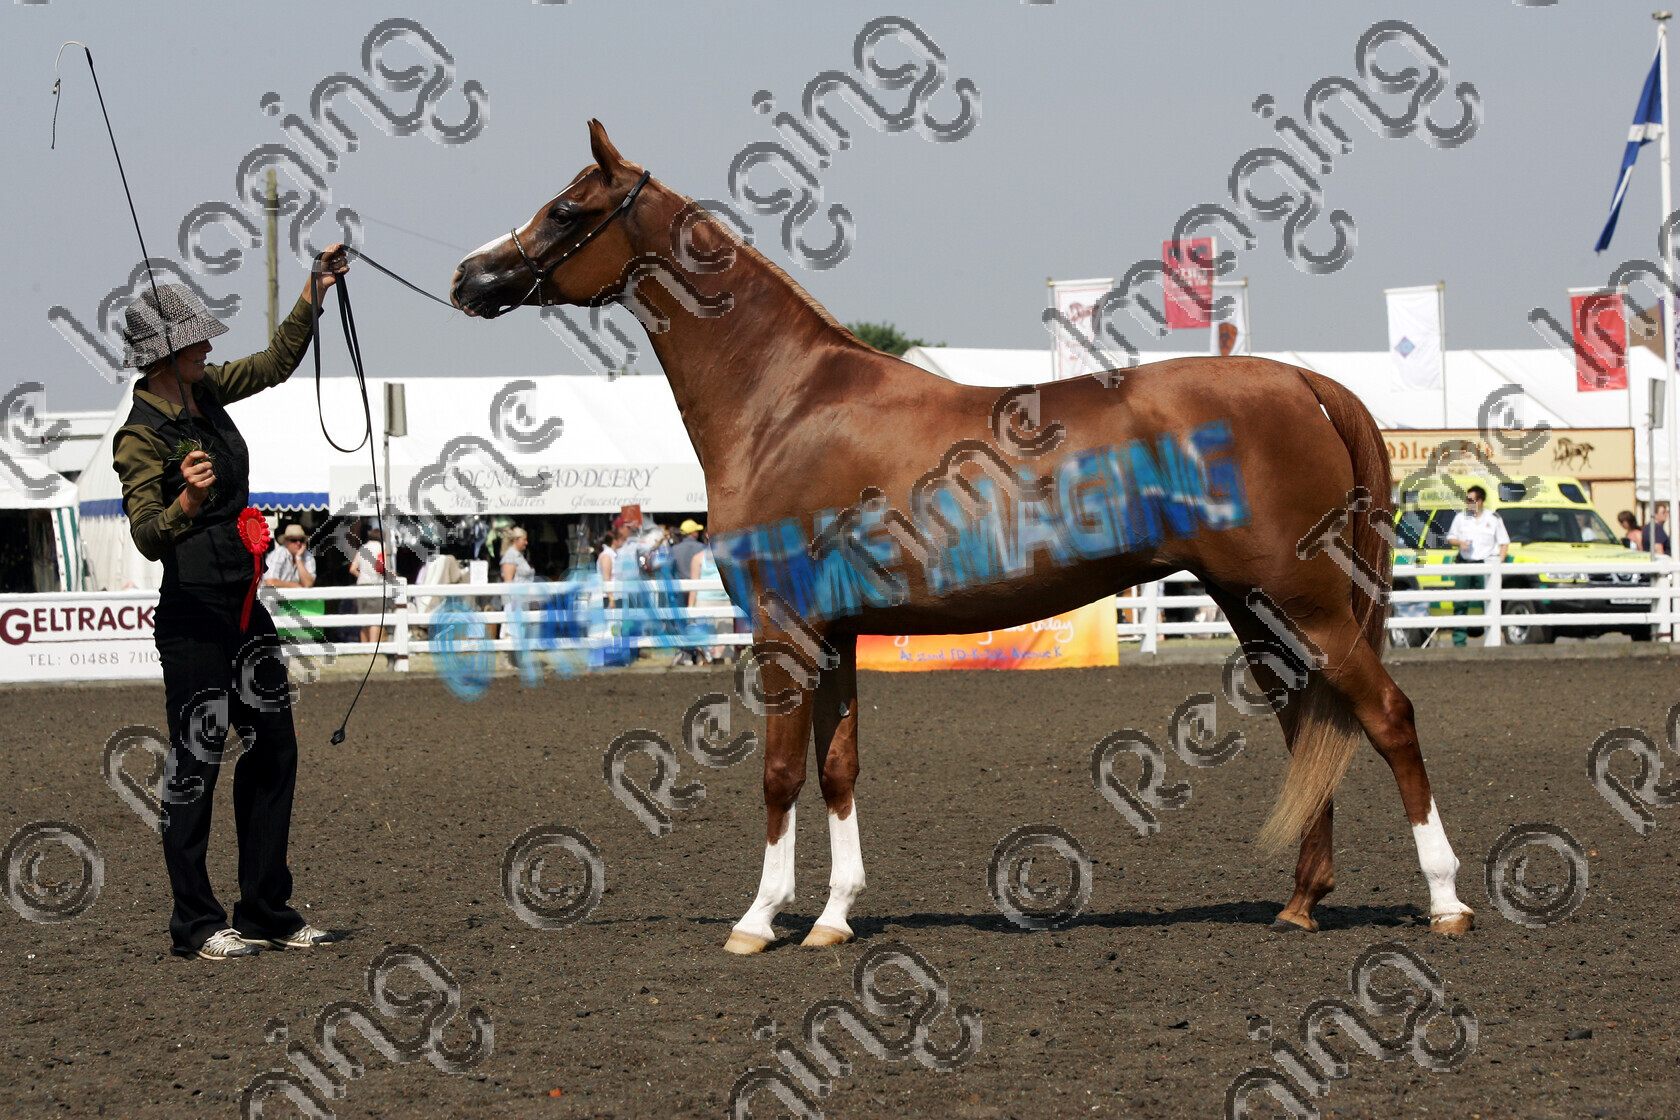 S06-31-4-091 copy 
 Keywords: The Royal Show rosette rosettes prize winner horse pony show showing Monday 3 July 2006 standing stood presentation championship champion in hand 1 Prawica, Mr P Atkinson chestnut mare Pure Bred Arab